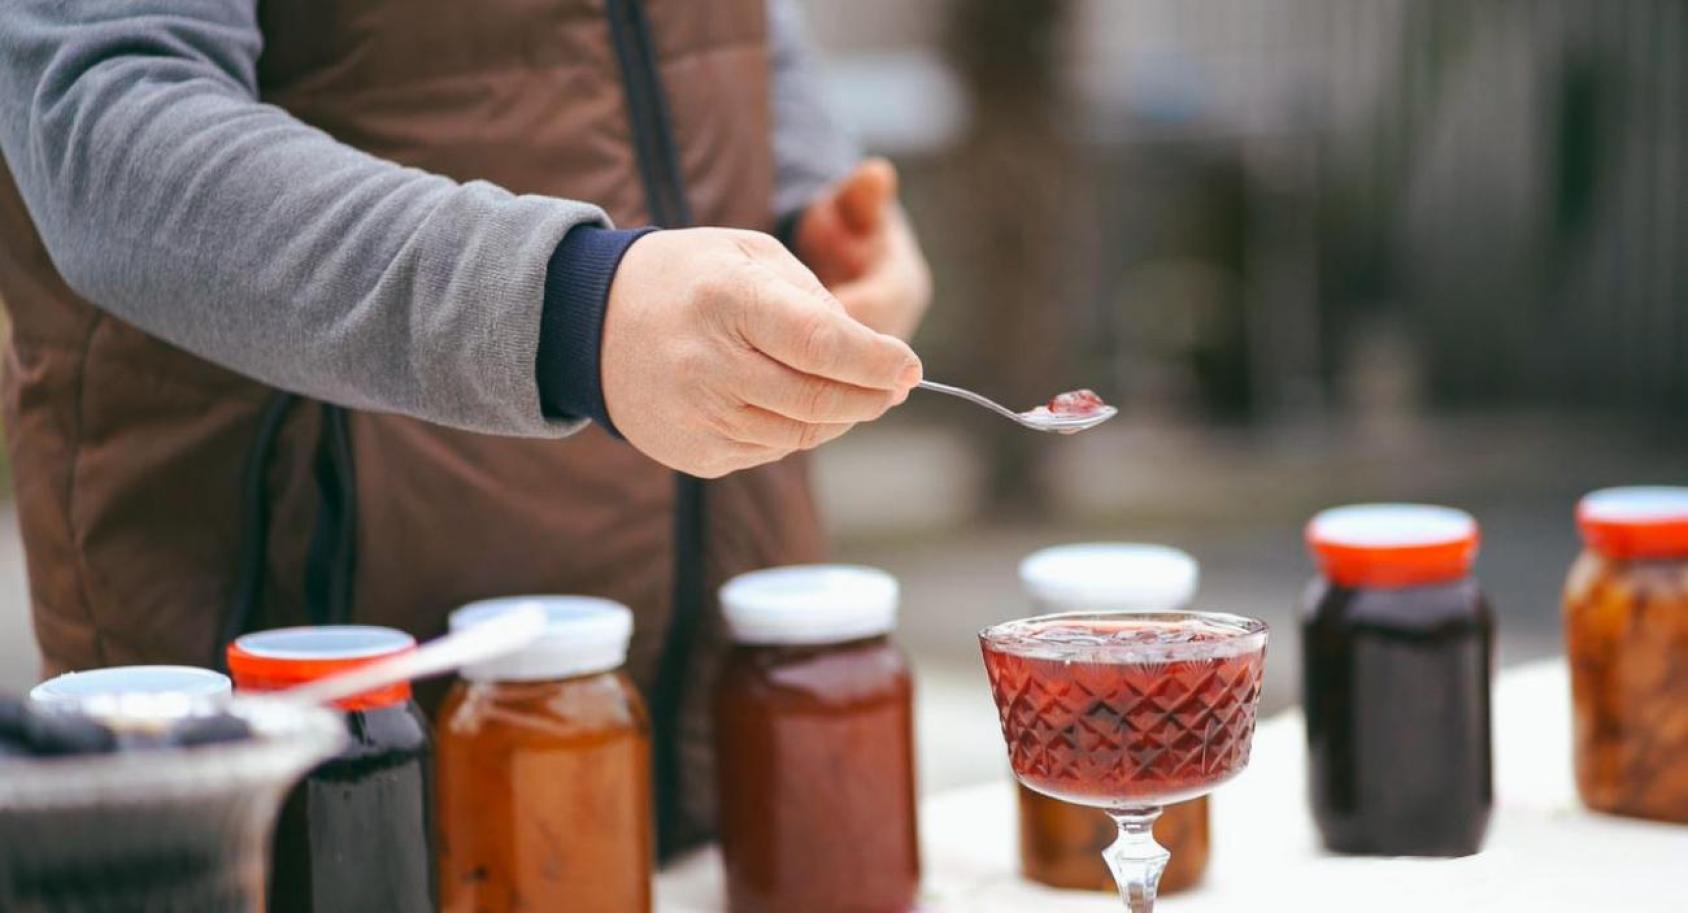 The close-up of a hand holding a spoon with jam with various jam jars in the background.